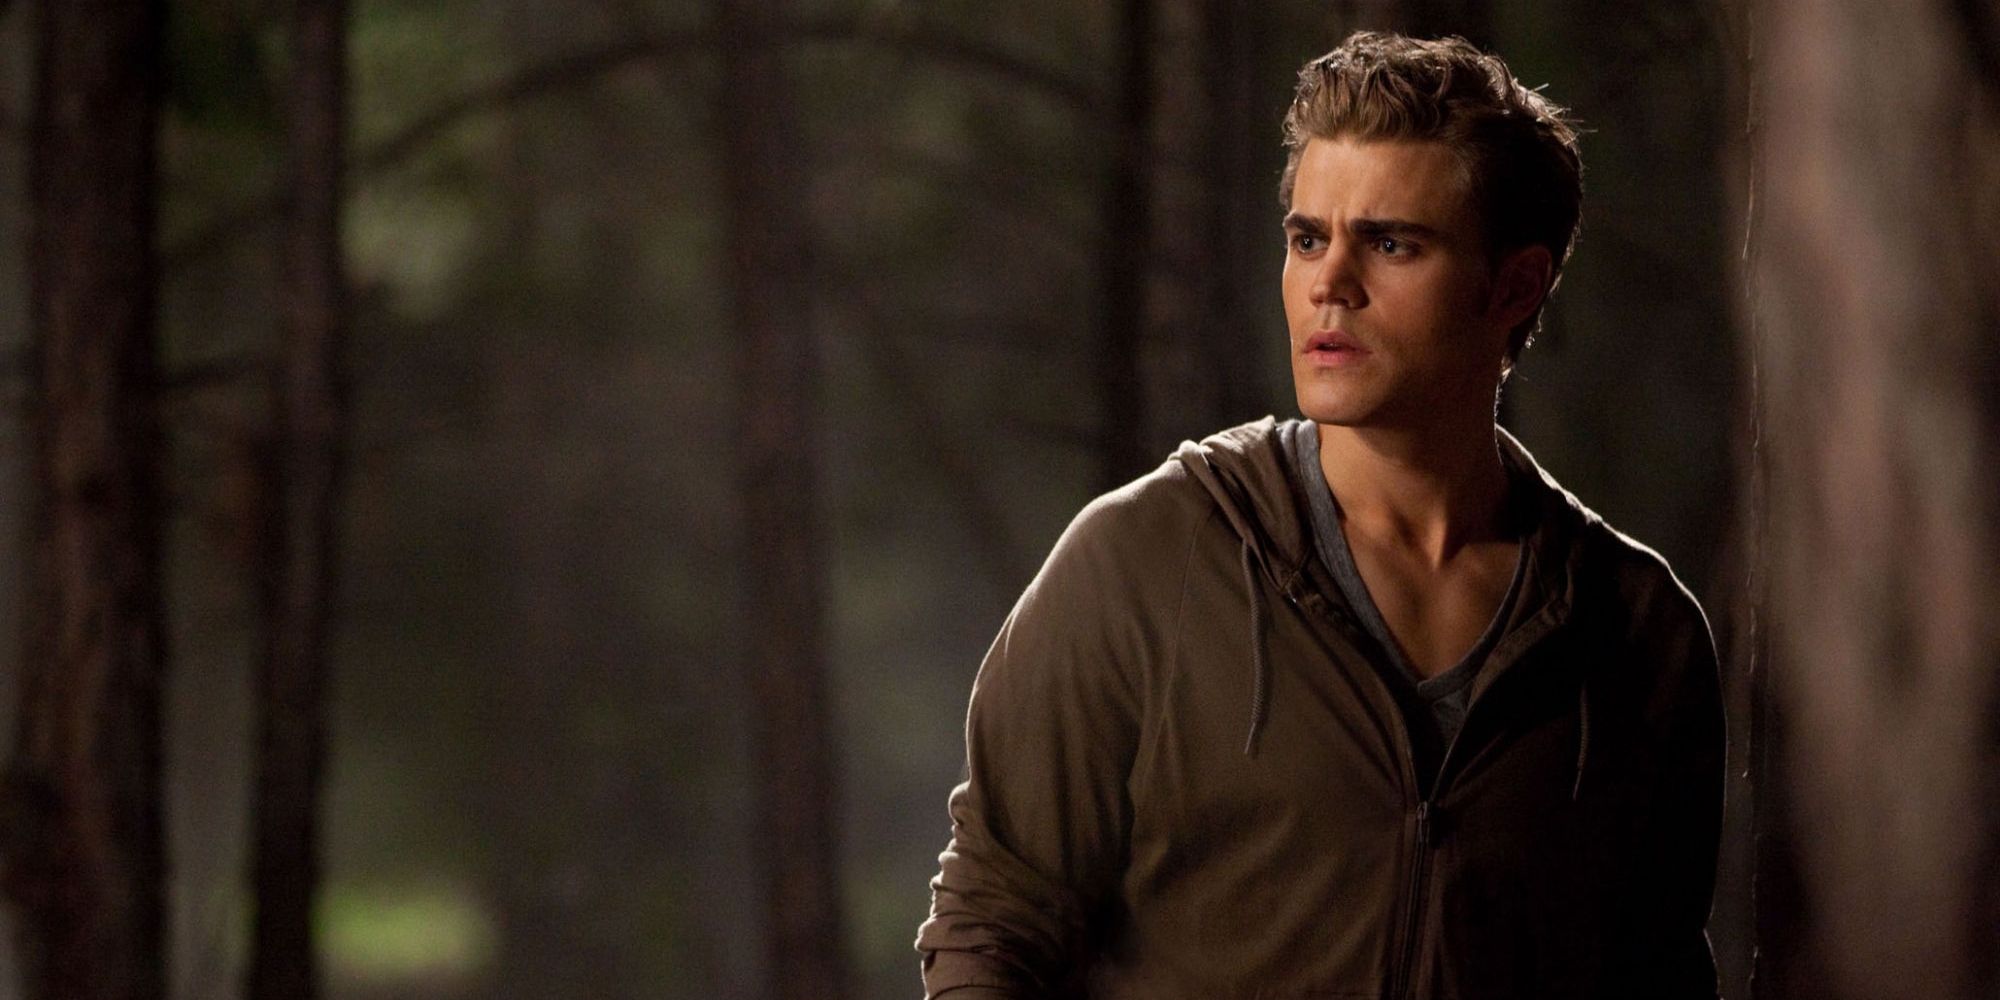 The Vampire Diaries The Main Characters Ranked By Work Ethic